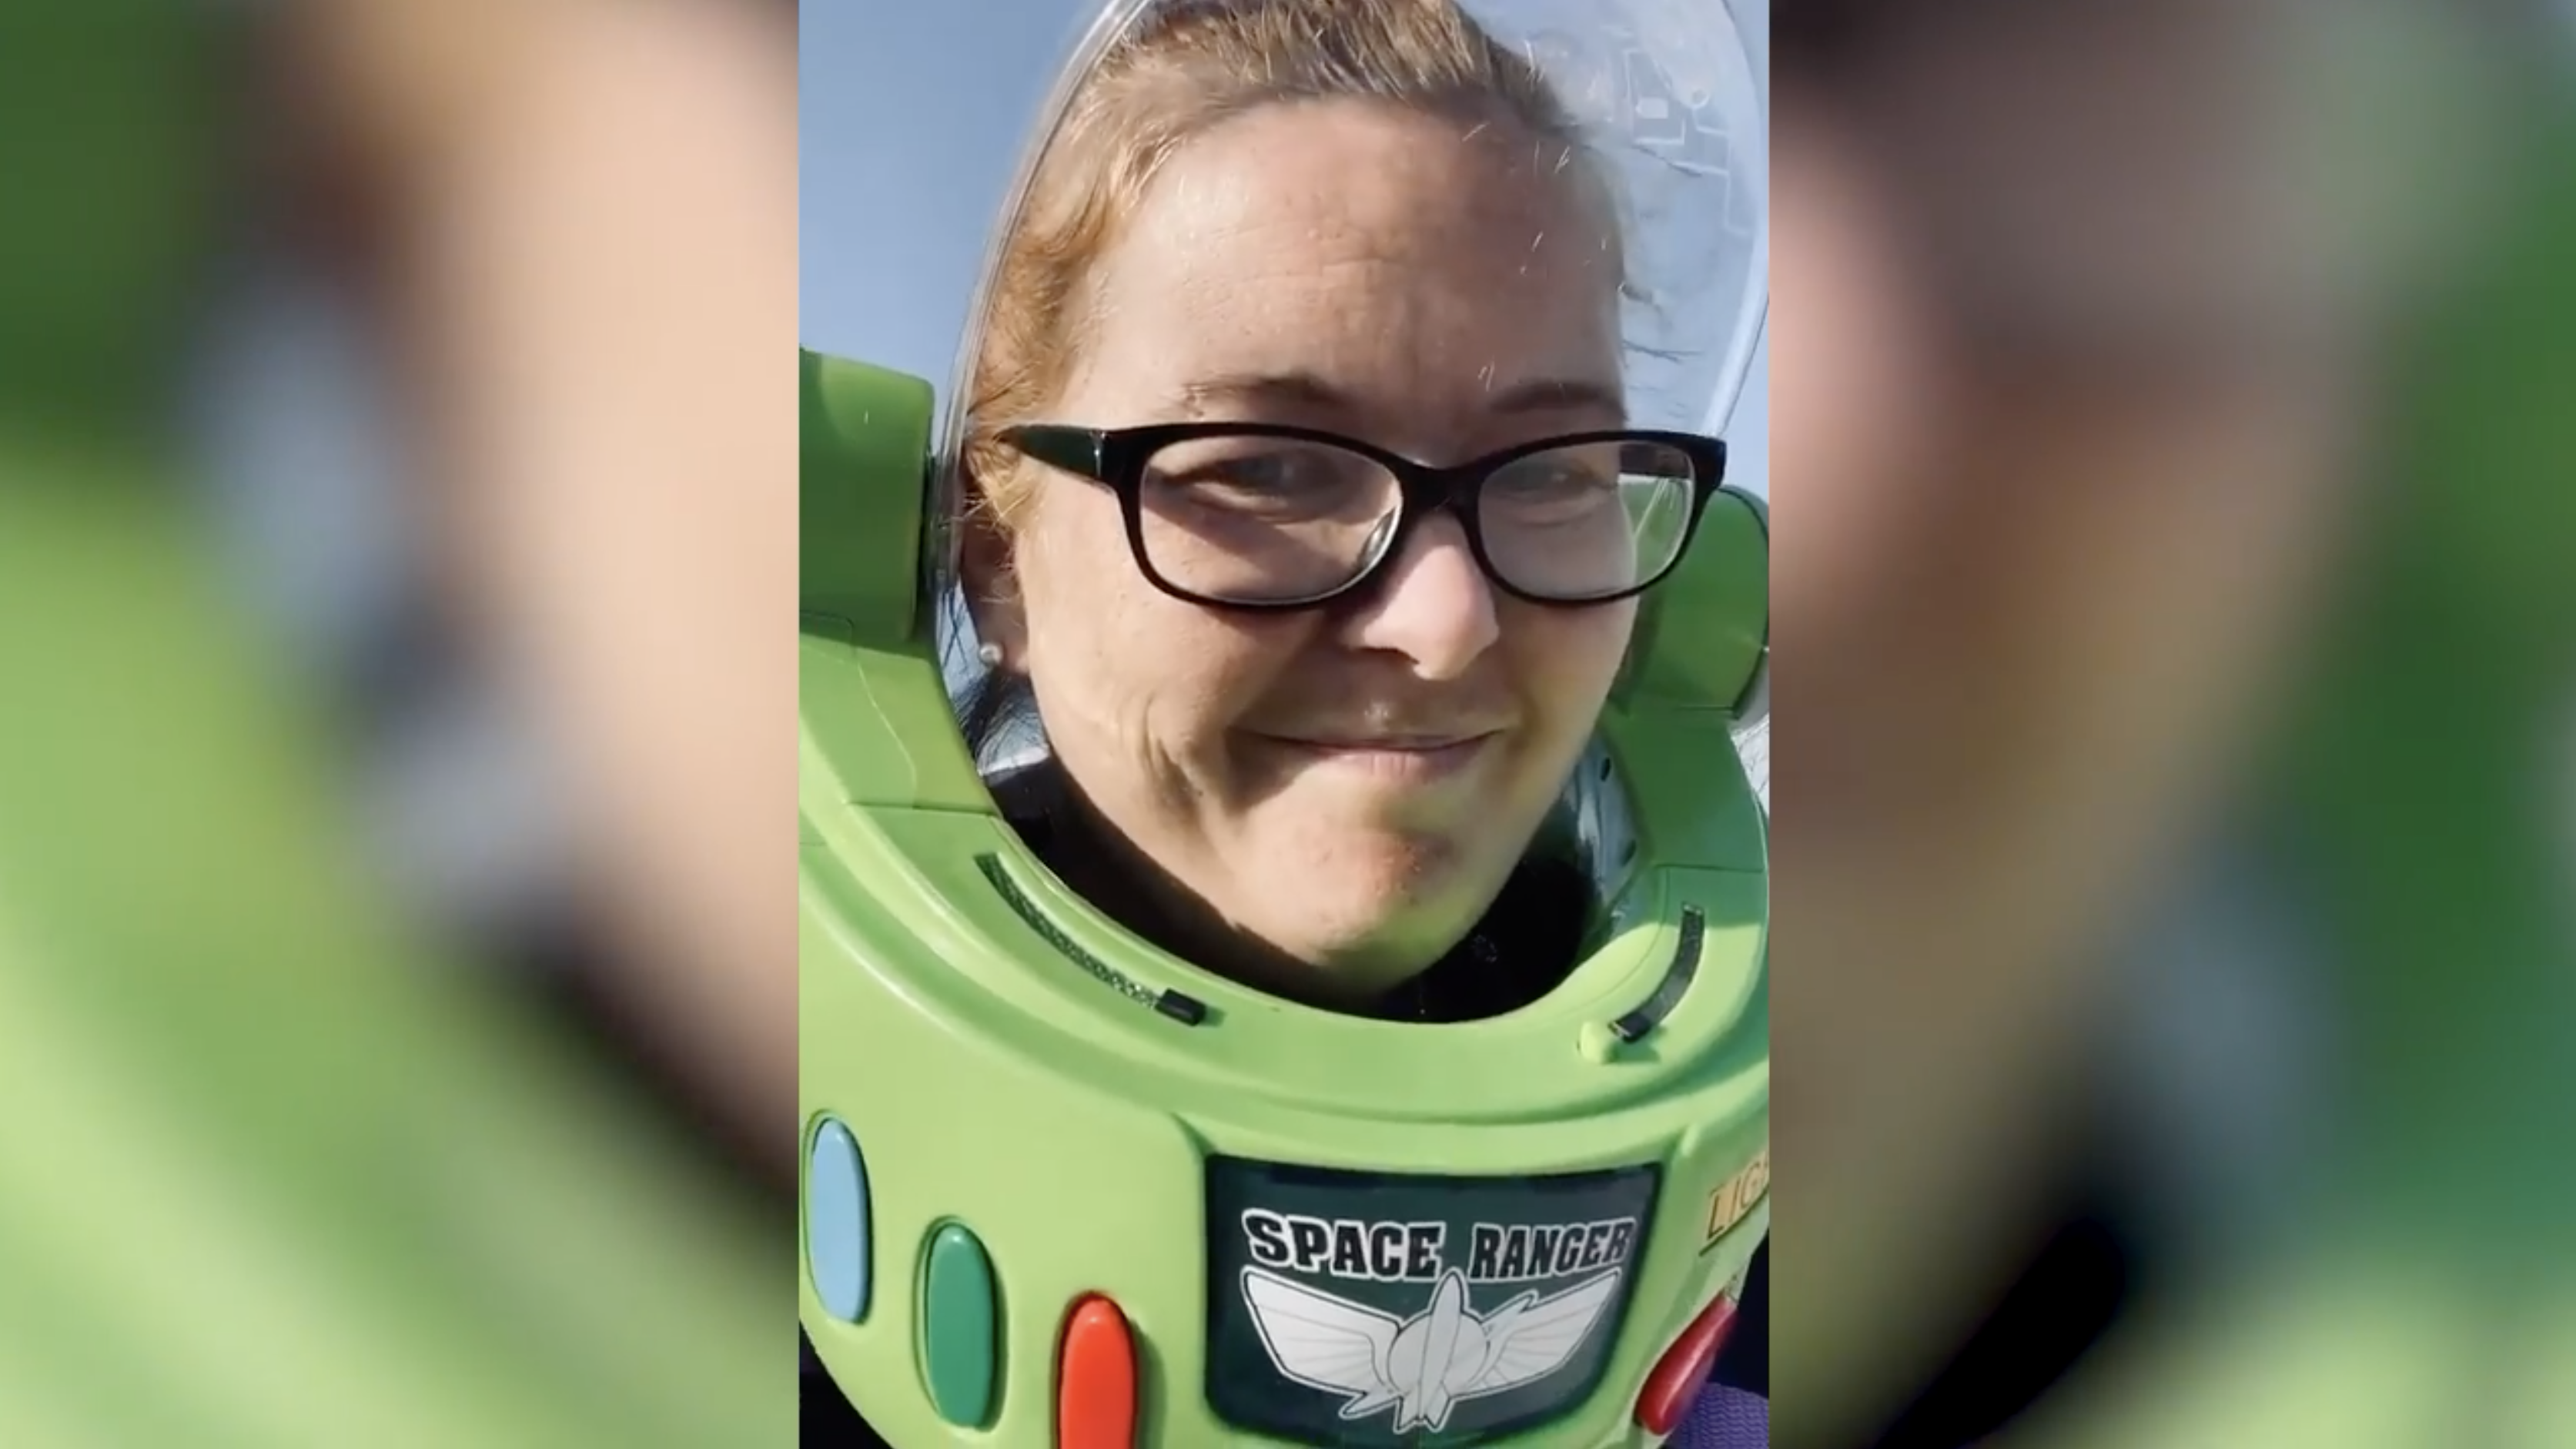 North Carolina Woman Wore a Buzz Lightyear Helmet to the Store Because She Didn’t Have a Mask